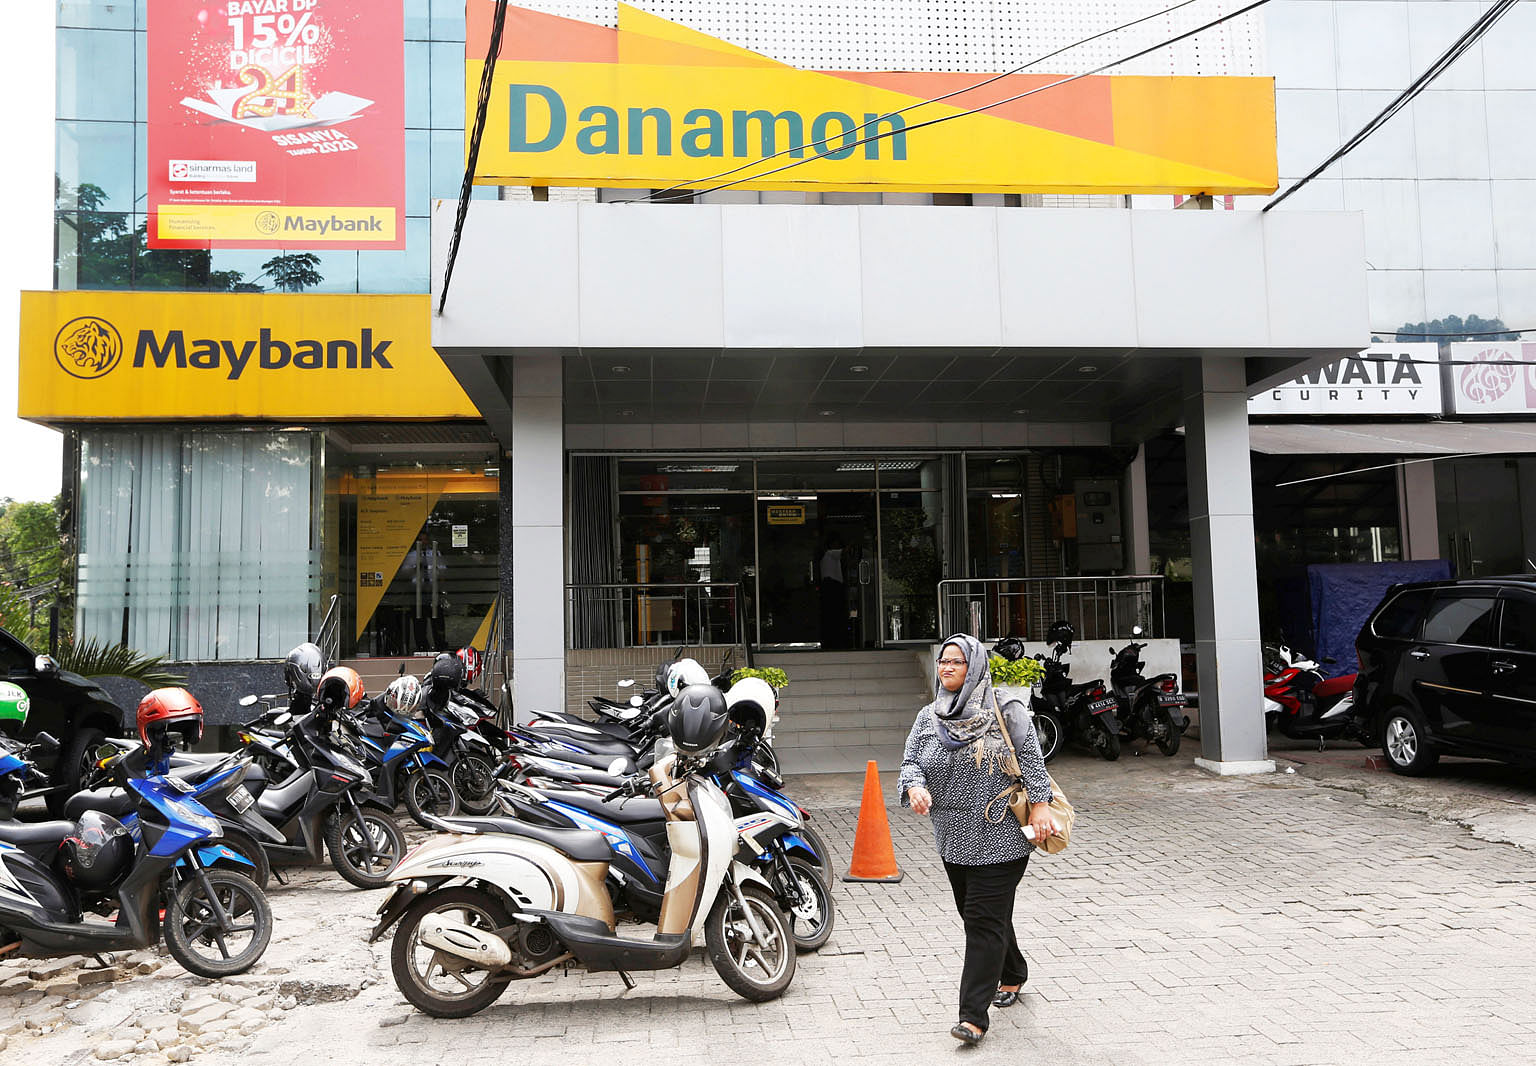 A Bank Danamon branch in Jakarta, Indonesia. Temasek Holdings plans to sell its 73.8 per cent stake in Bank Danamon to Japan's MUFG.